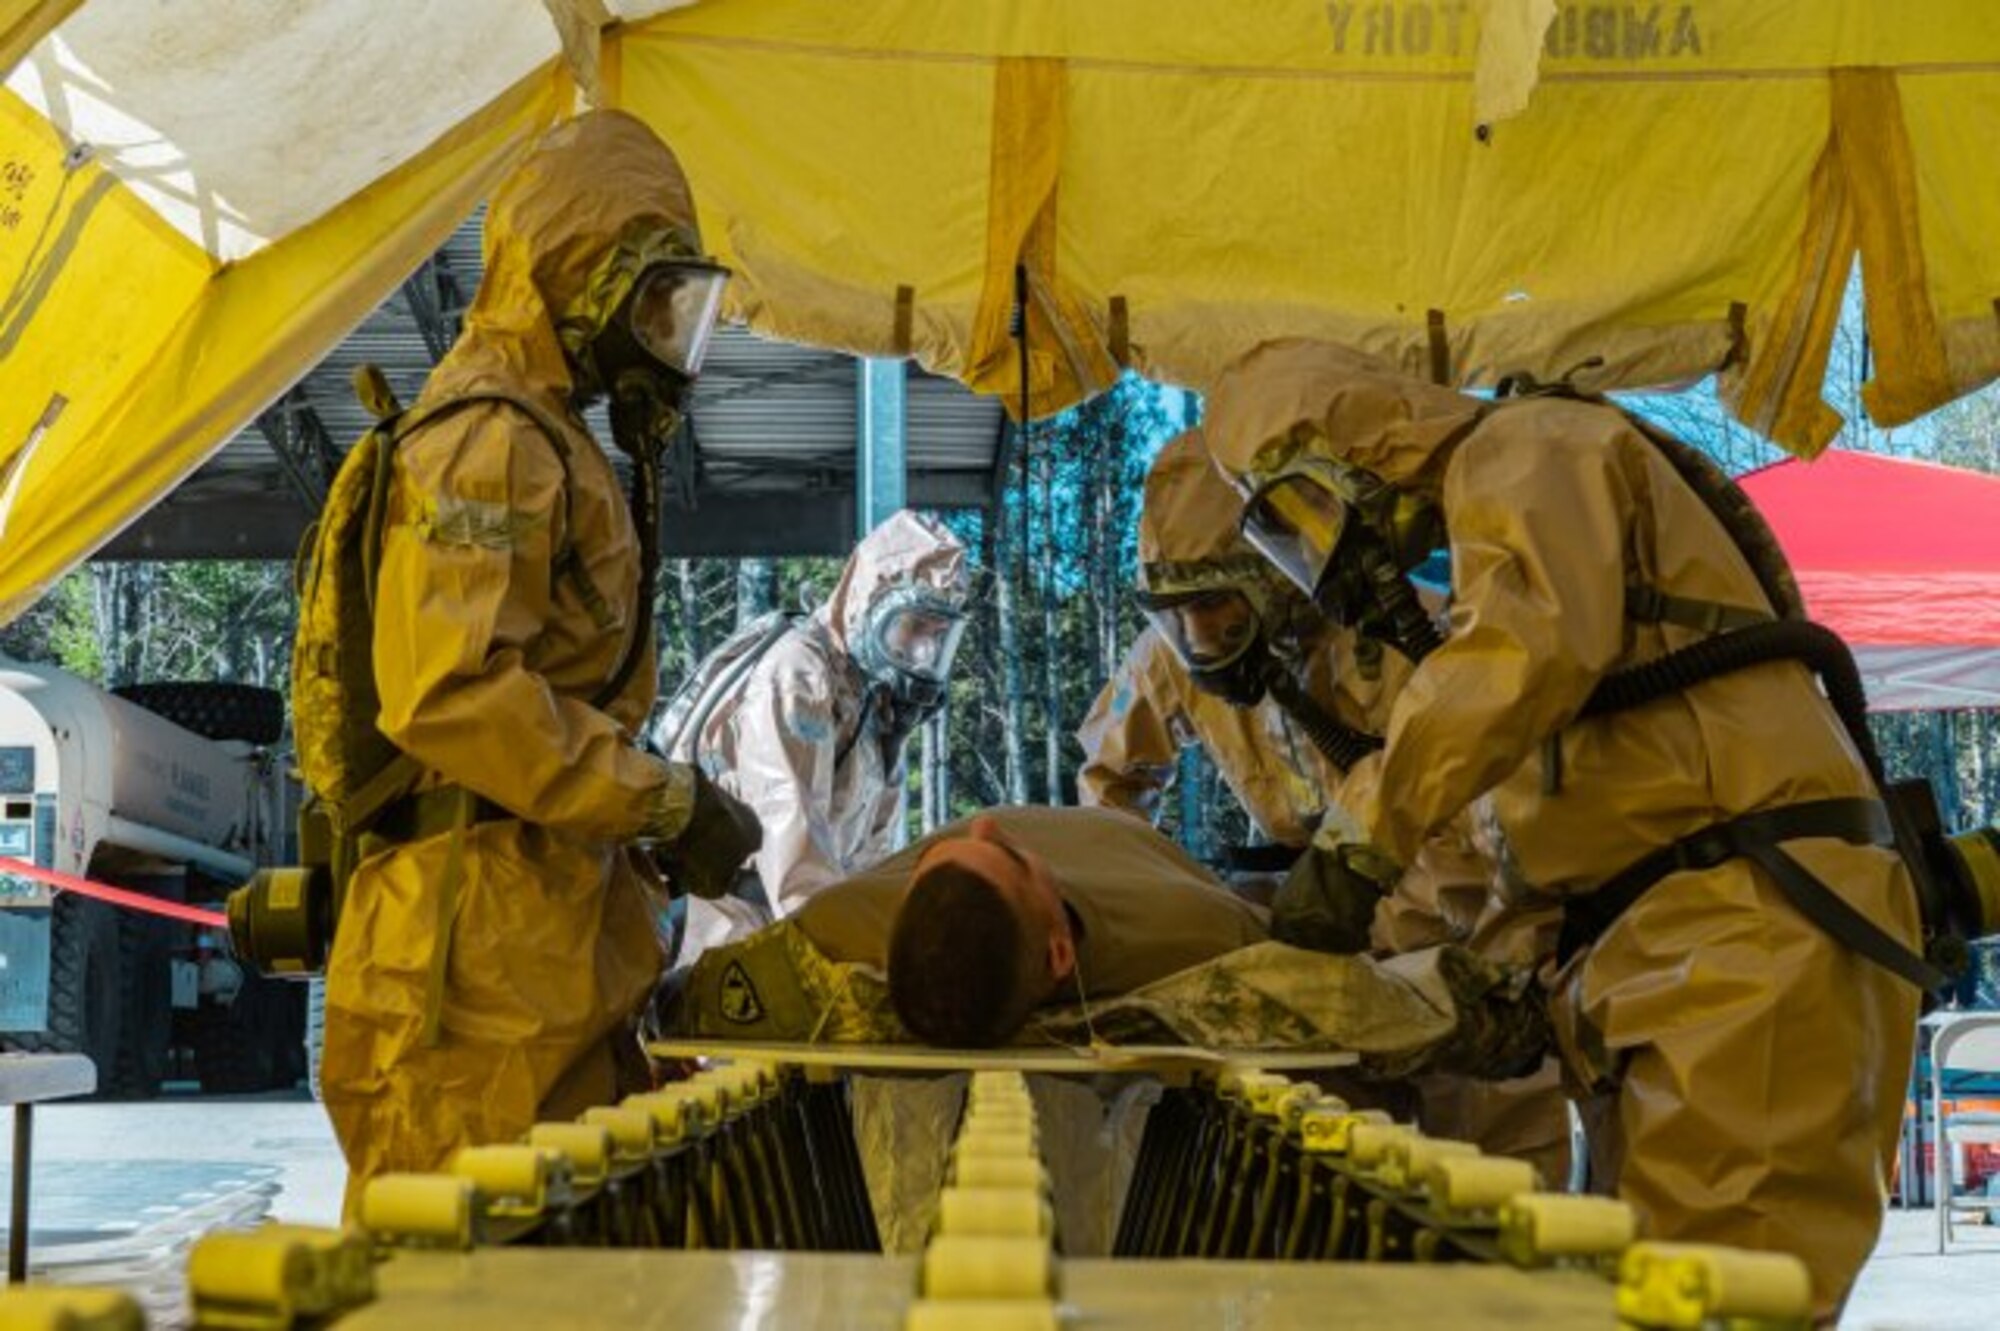 A decontamination team with the New England CERFP practices decontamination of a simulated casualty during their Nov. 5-7 training in Brunswick, Maine. (Photo Credit: Spc. Darin Douin)